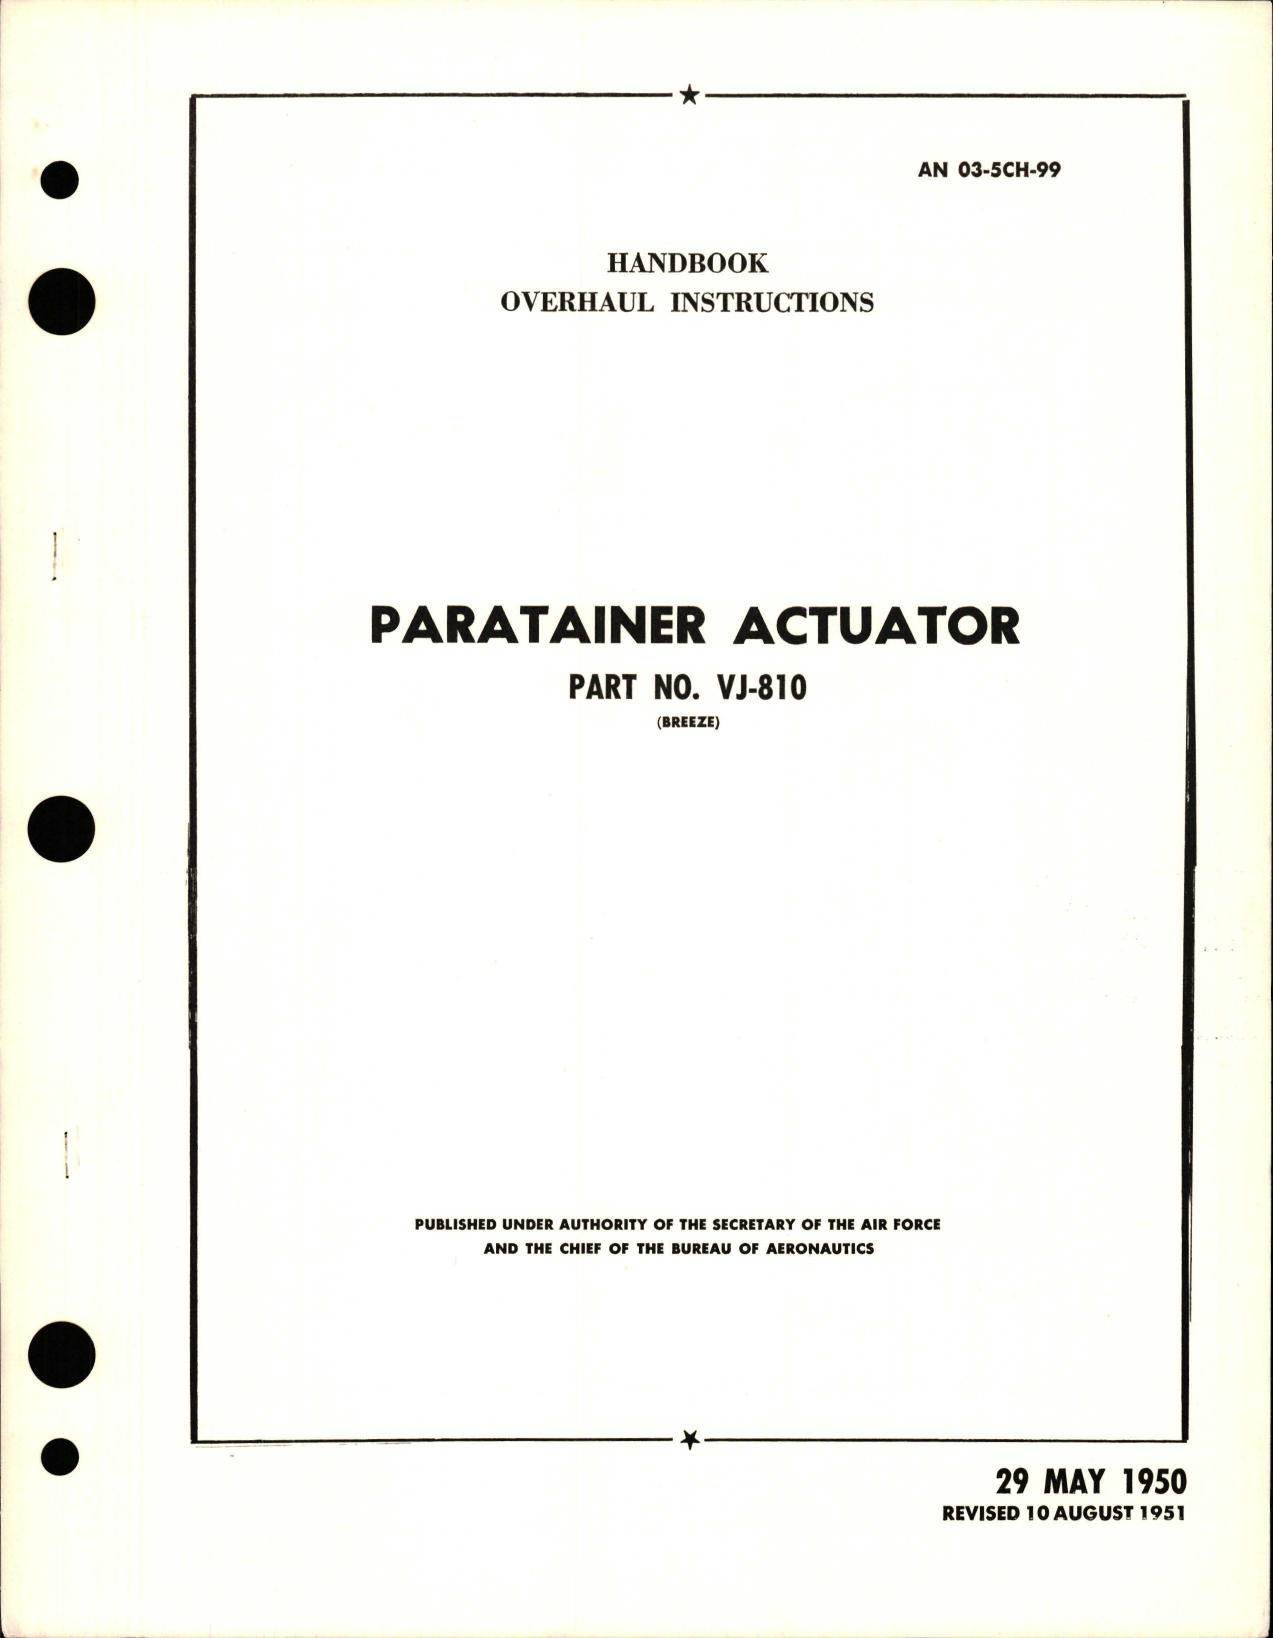 Sample page 1 from AirCorps Library document: Overhaul Instructions for Paratainer Actuator - Part VJ-810